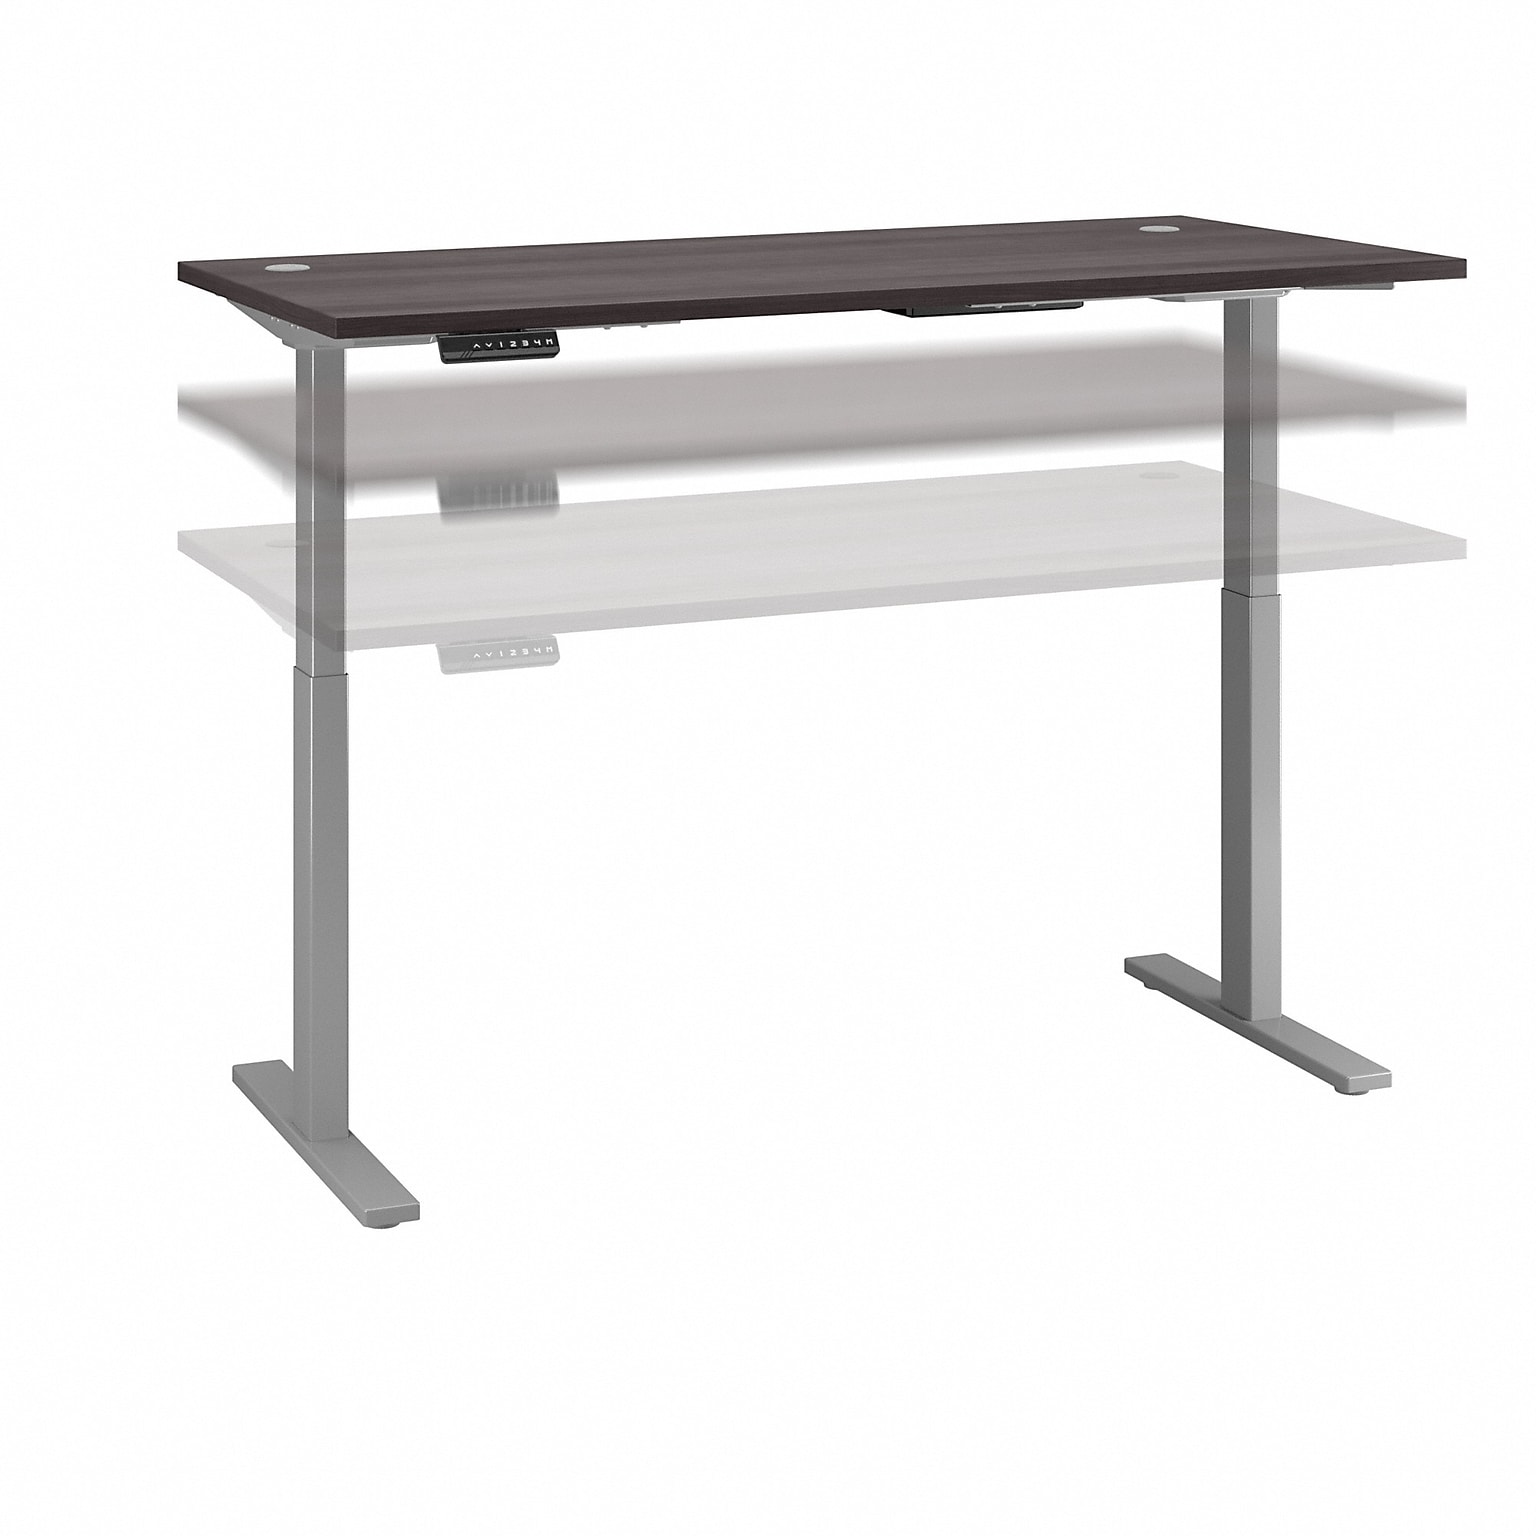 Bush Business Furniture Move 60 Series 72W Electric Height Adjustable Standing Desk, Storm Gray (M6S7230SGSK)